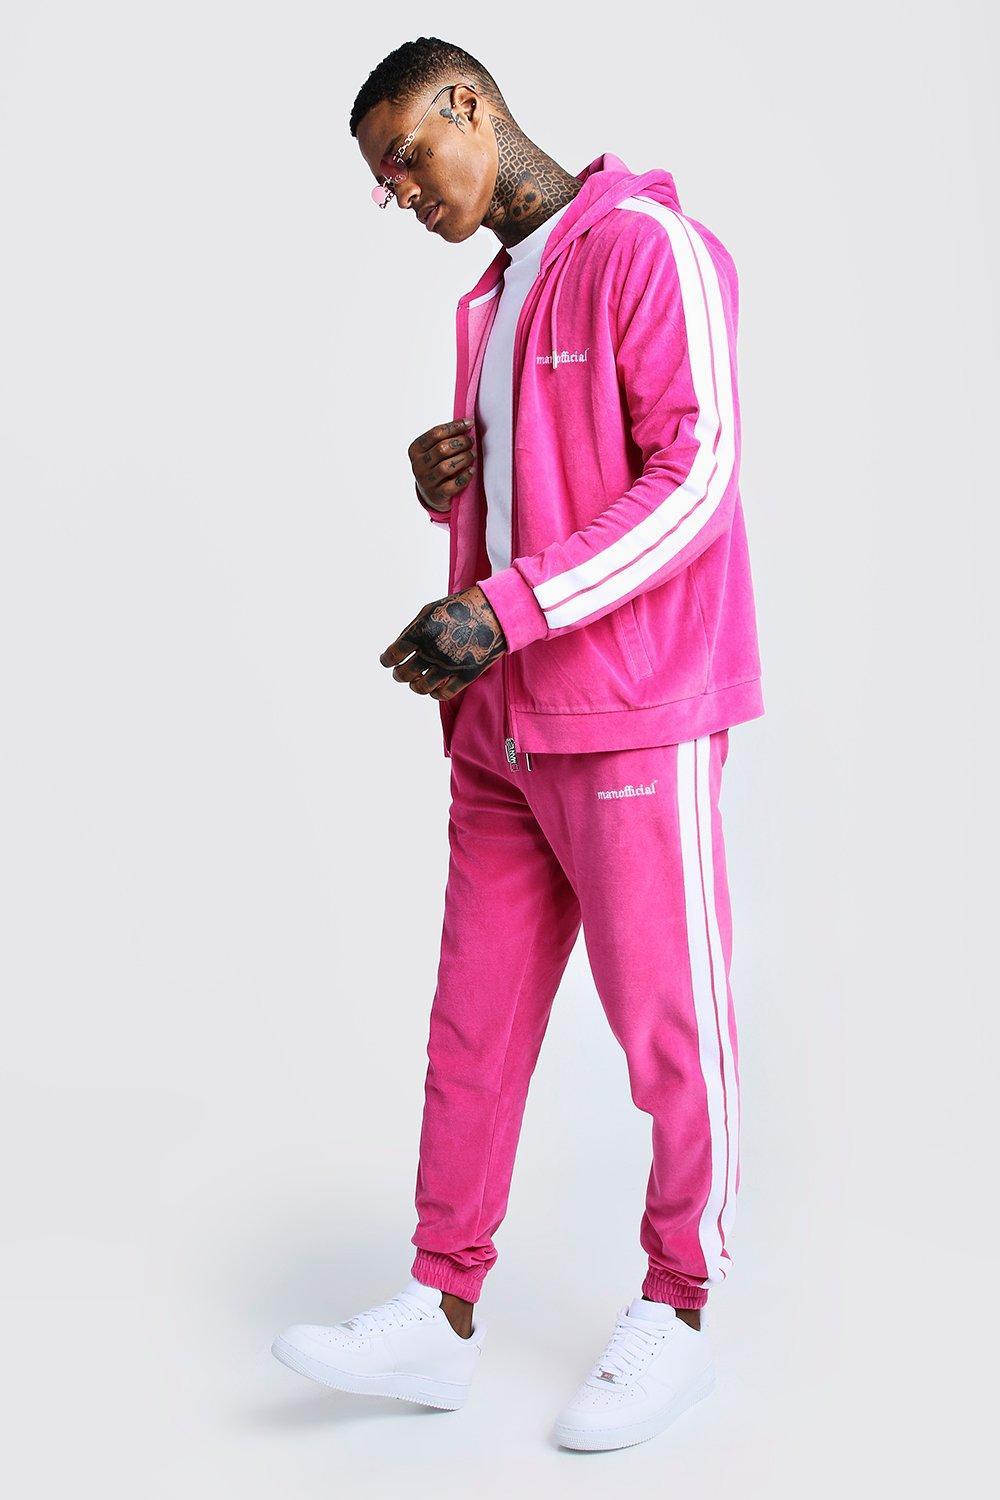 BoohooMAN Man Official Velour Tracksuit With Side Tape in Pink for Men |  Lyst